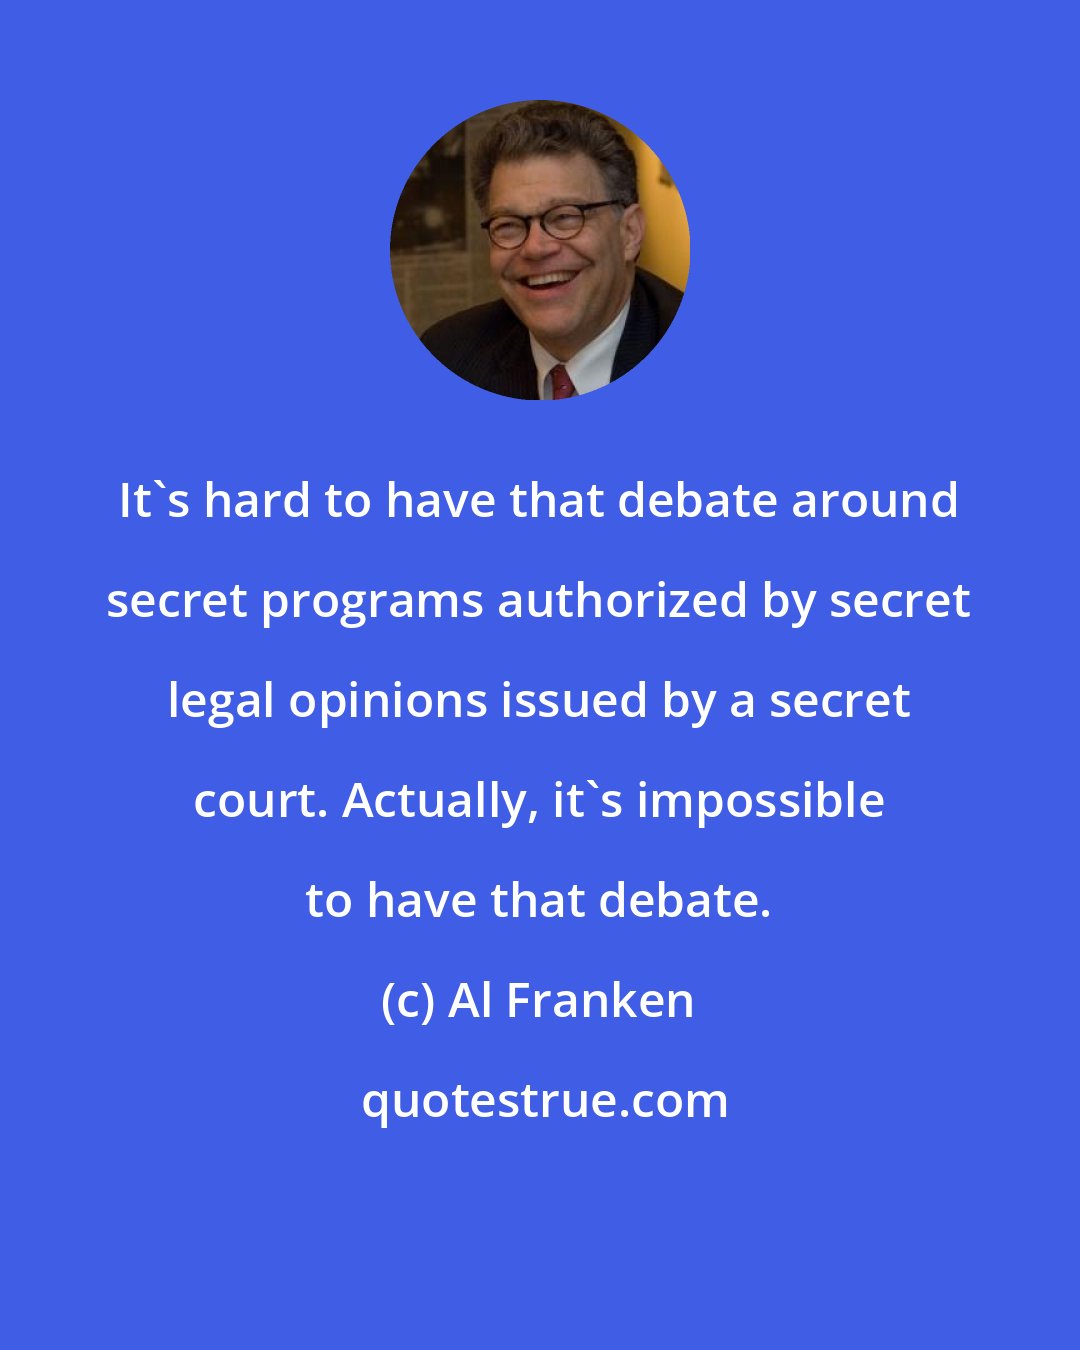 Al Franken: It's hard to have that debate around secret programs authorized by secret legal opinions issued by a secret court. Actually, it's impossible to have that debate.